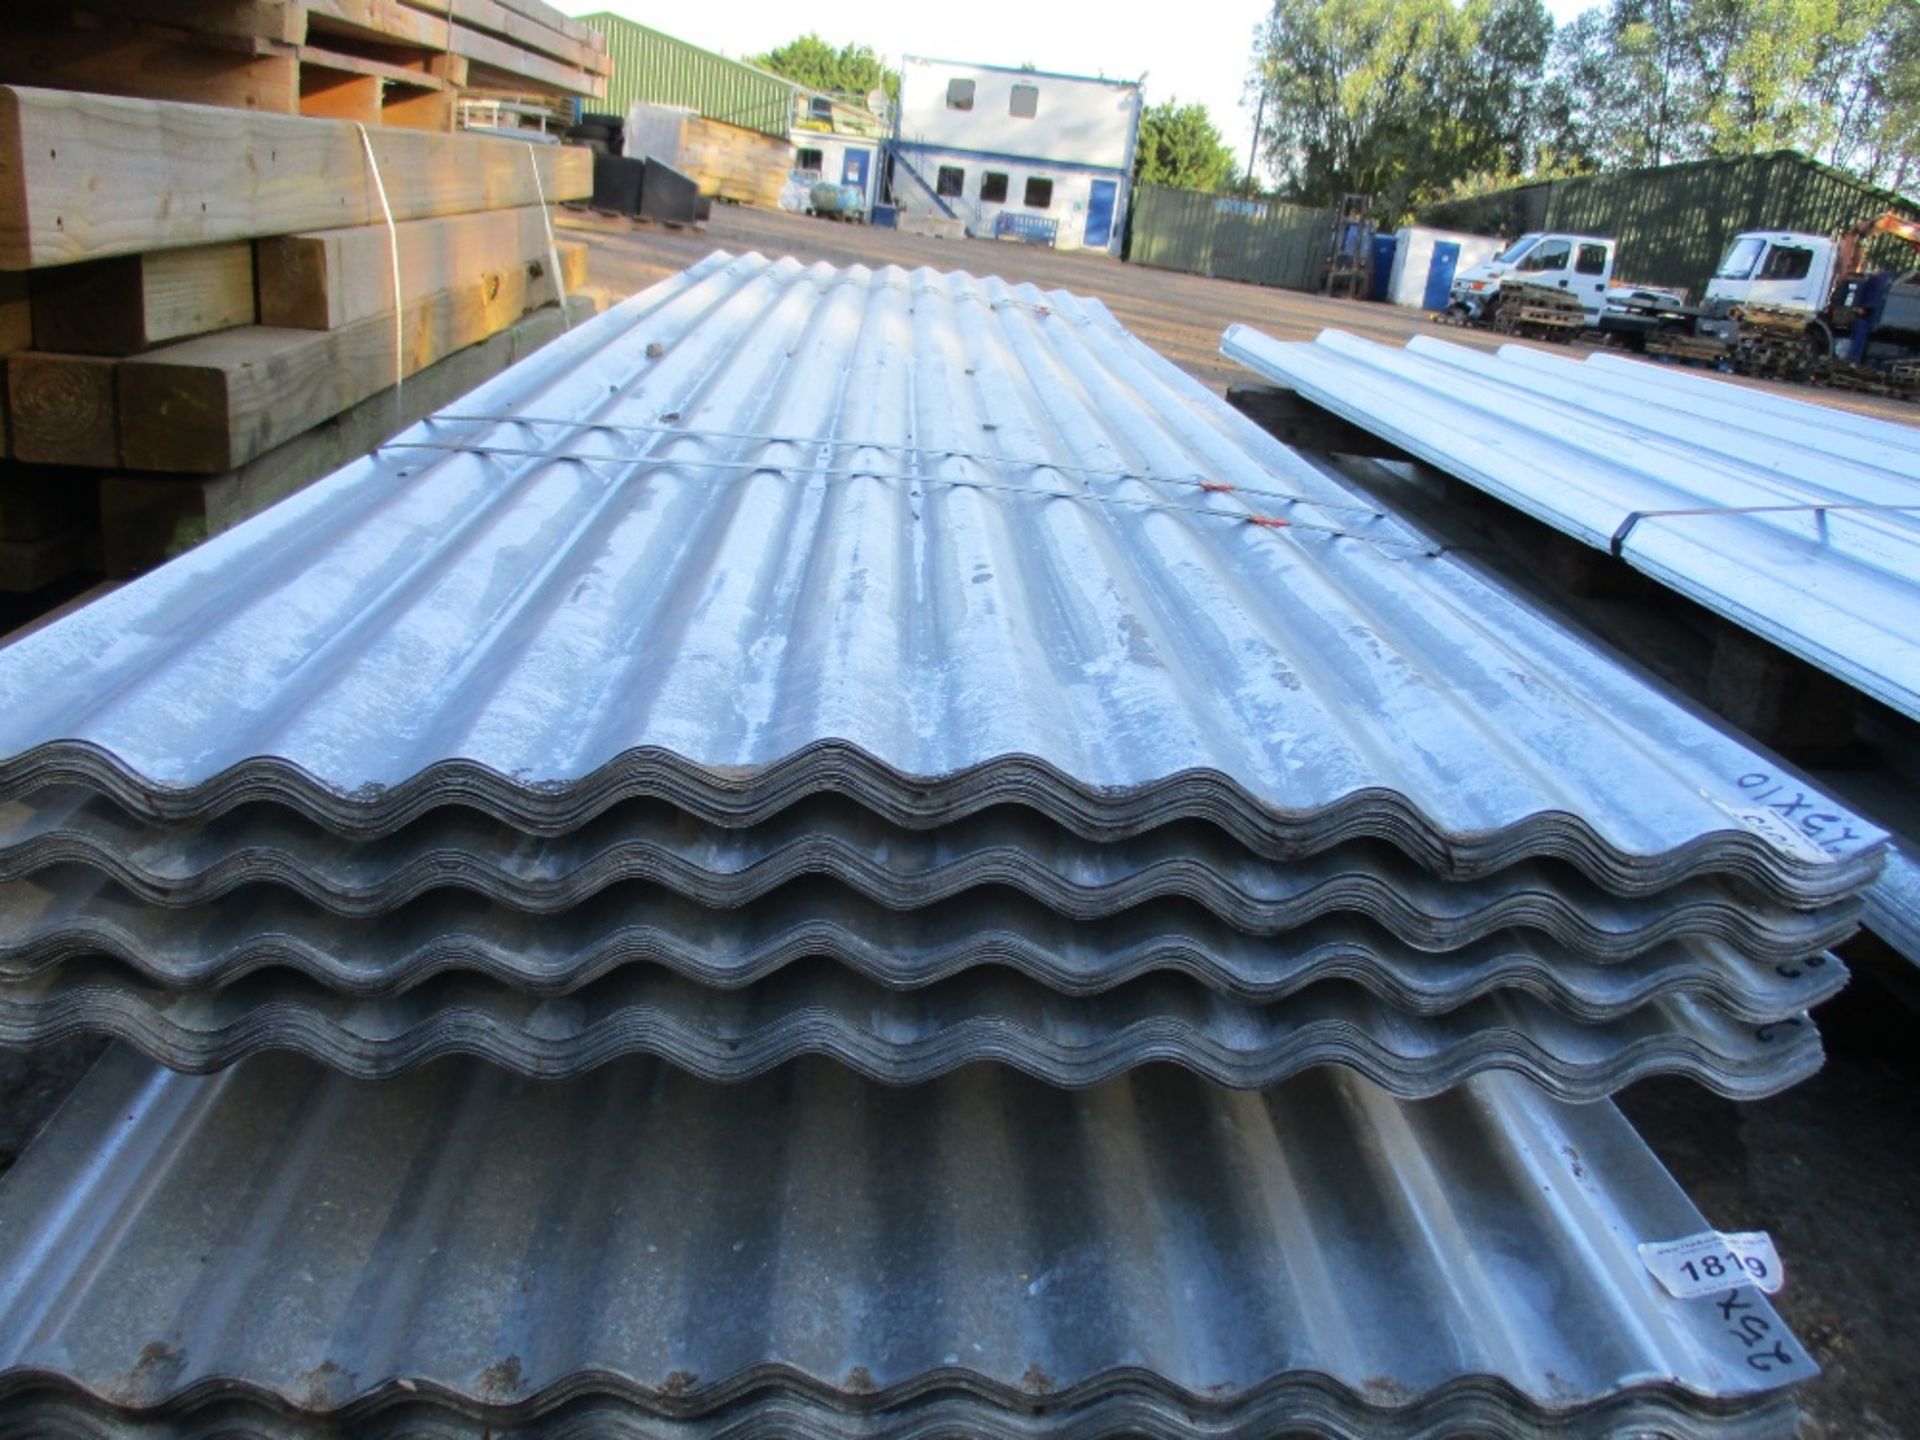 100NO. 12ft galvanised corrugated roof sheets SUPPLIED IN 4 X PACKS OF 25NO UNUSED